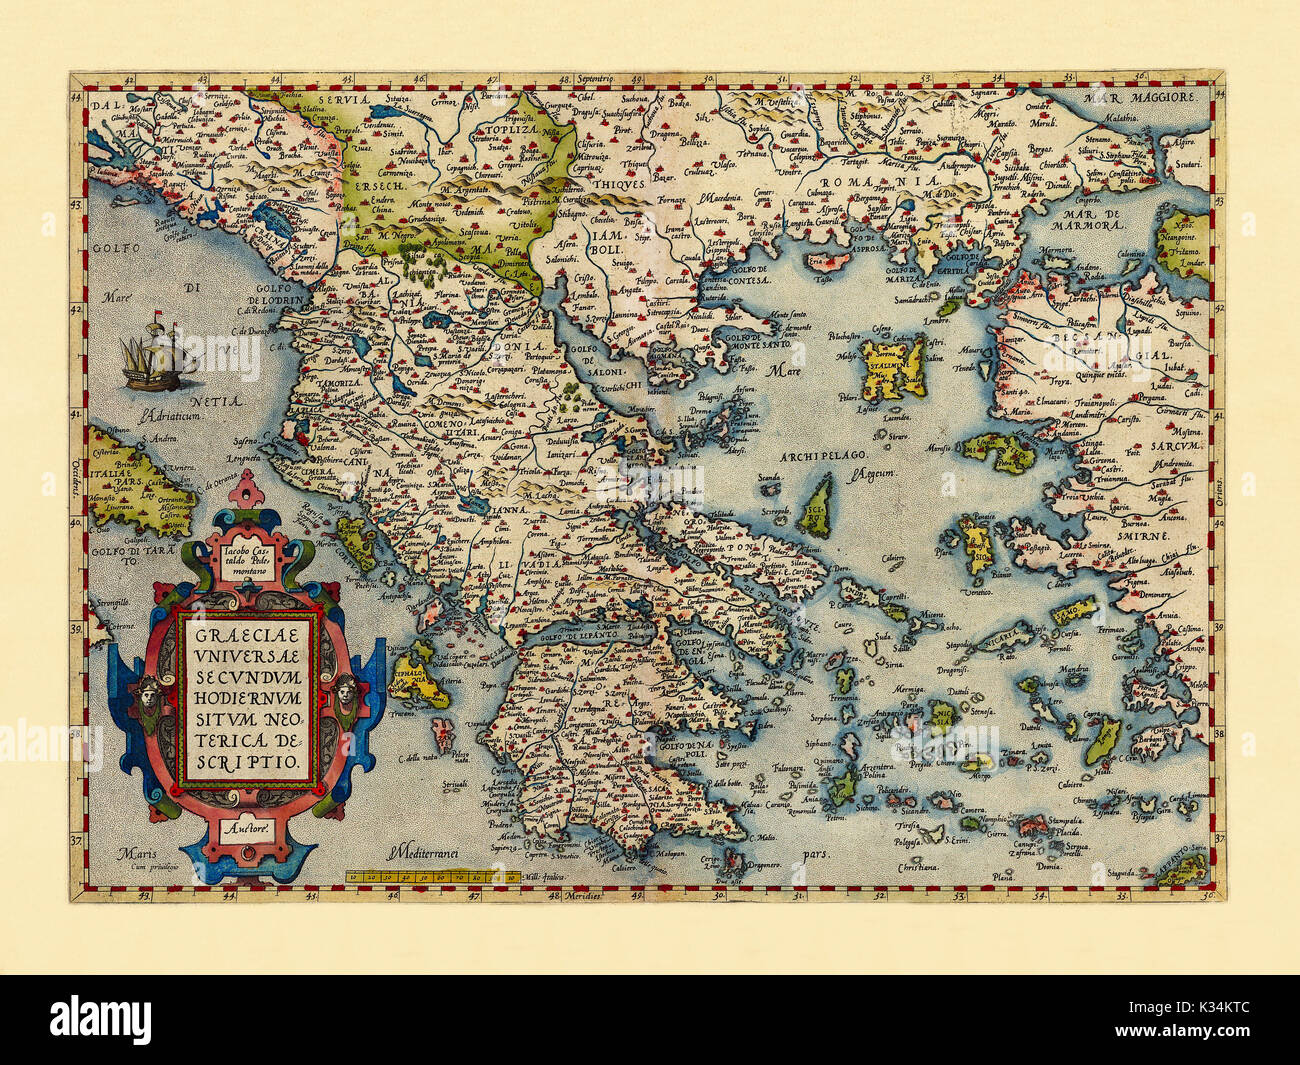 Old map of Greece. Excellent state of preservation realized in ancient style. All the graphic composition is inside a frame. By Ortelius, Theatrum Orbis Terrarum, Antwerp, 1570 Stock Photo